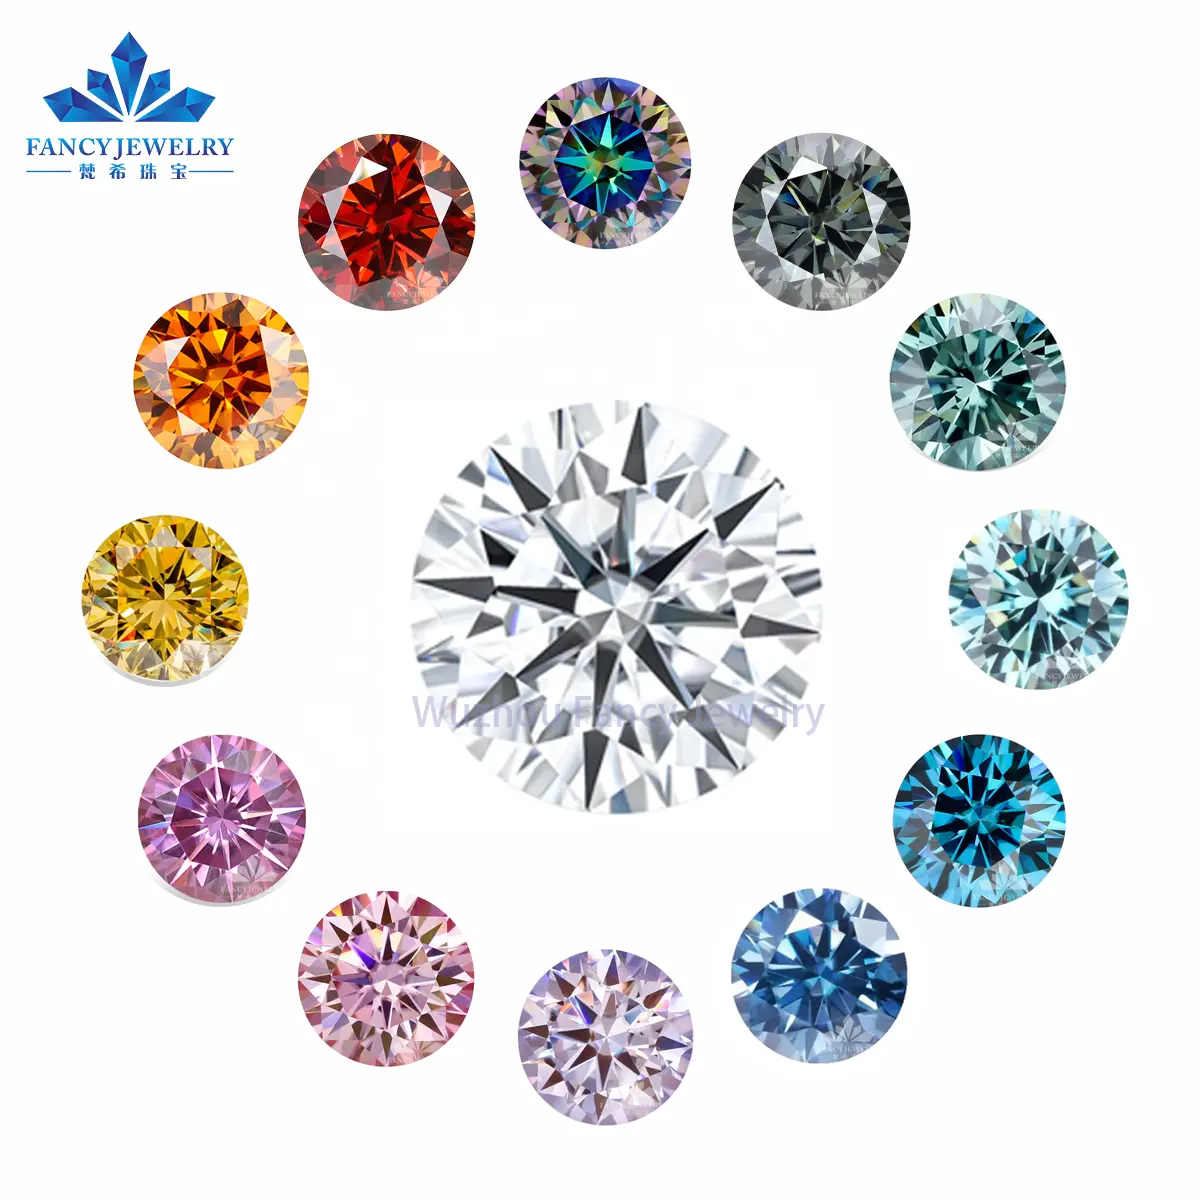 Fancy jewelry 4-11mm round gra certified vvs purple red yellow green pink blue colored wholesale diamond stones loose moissanite